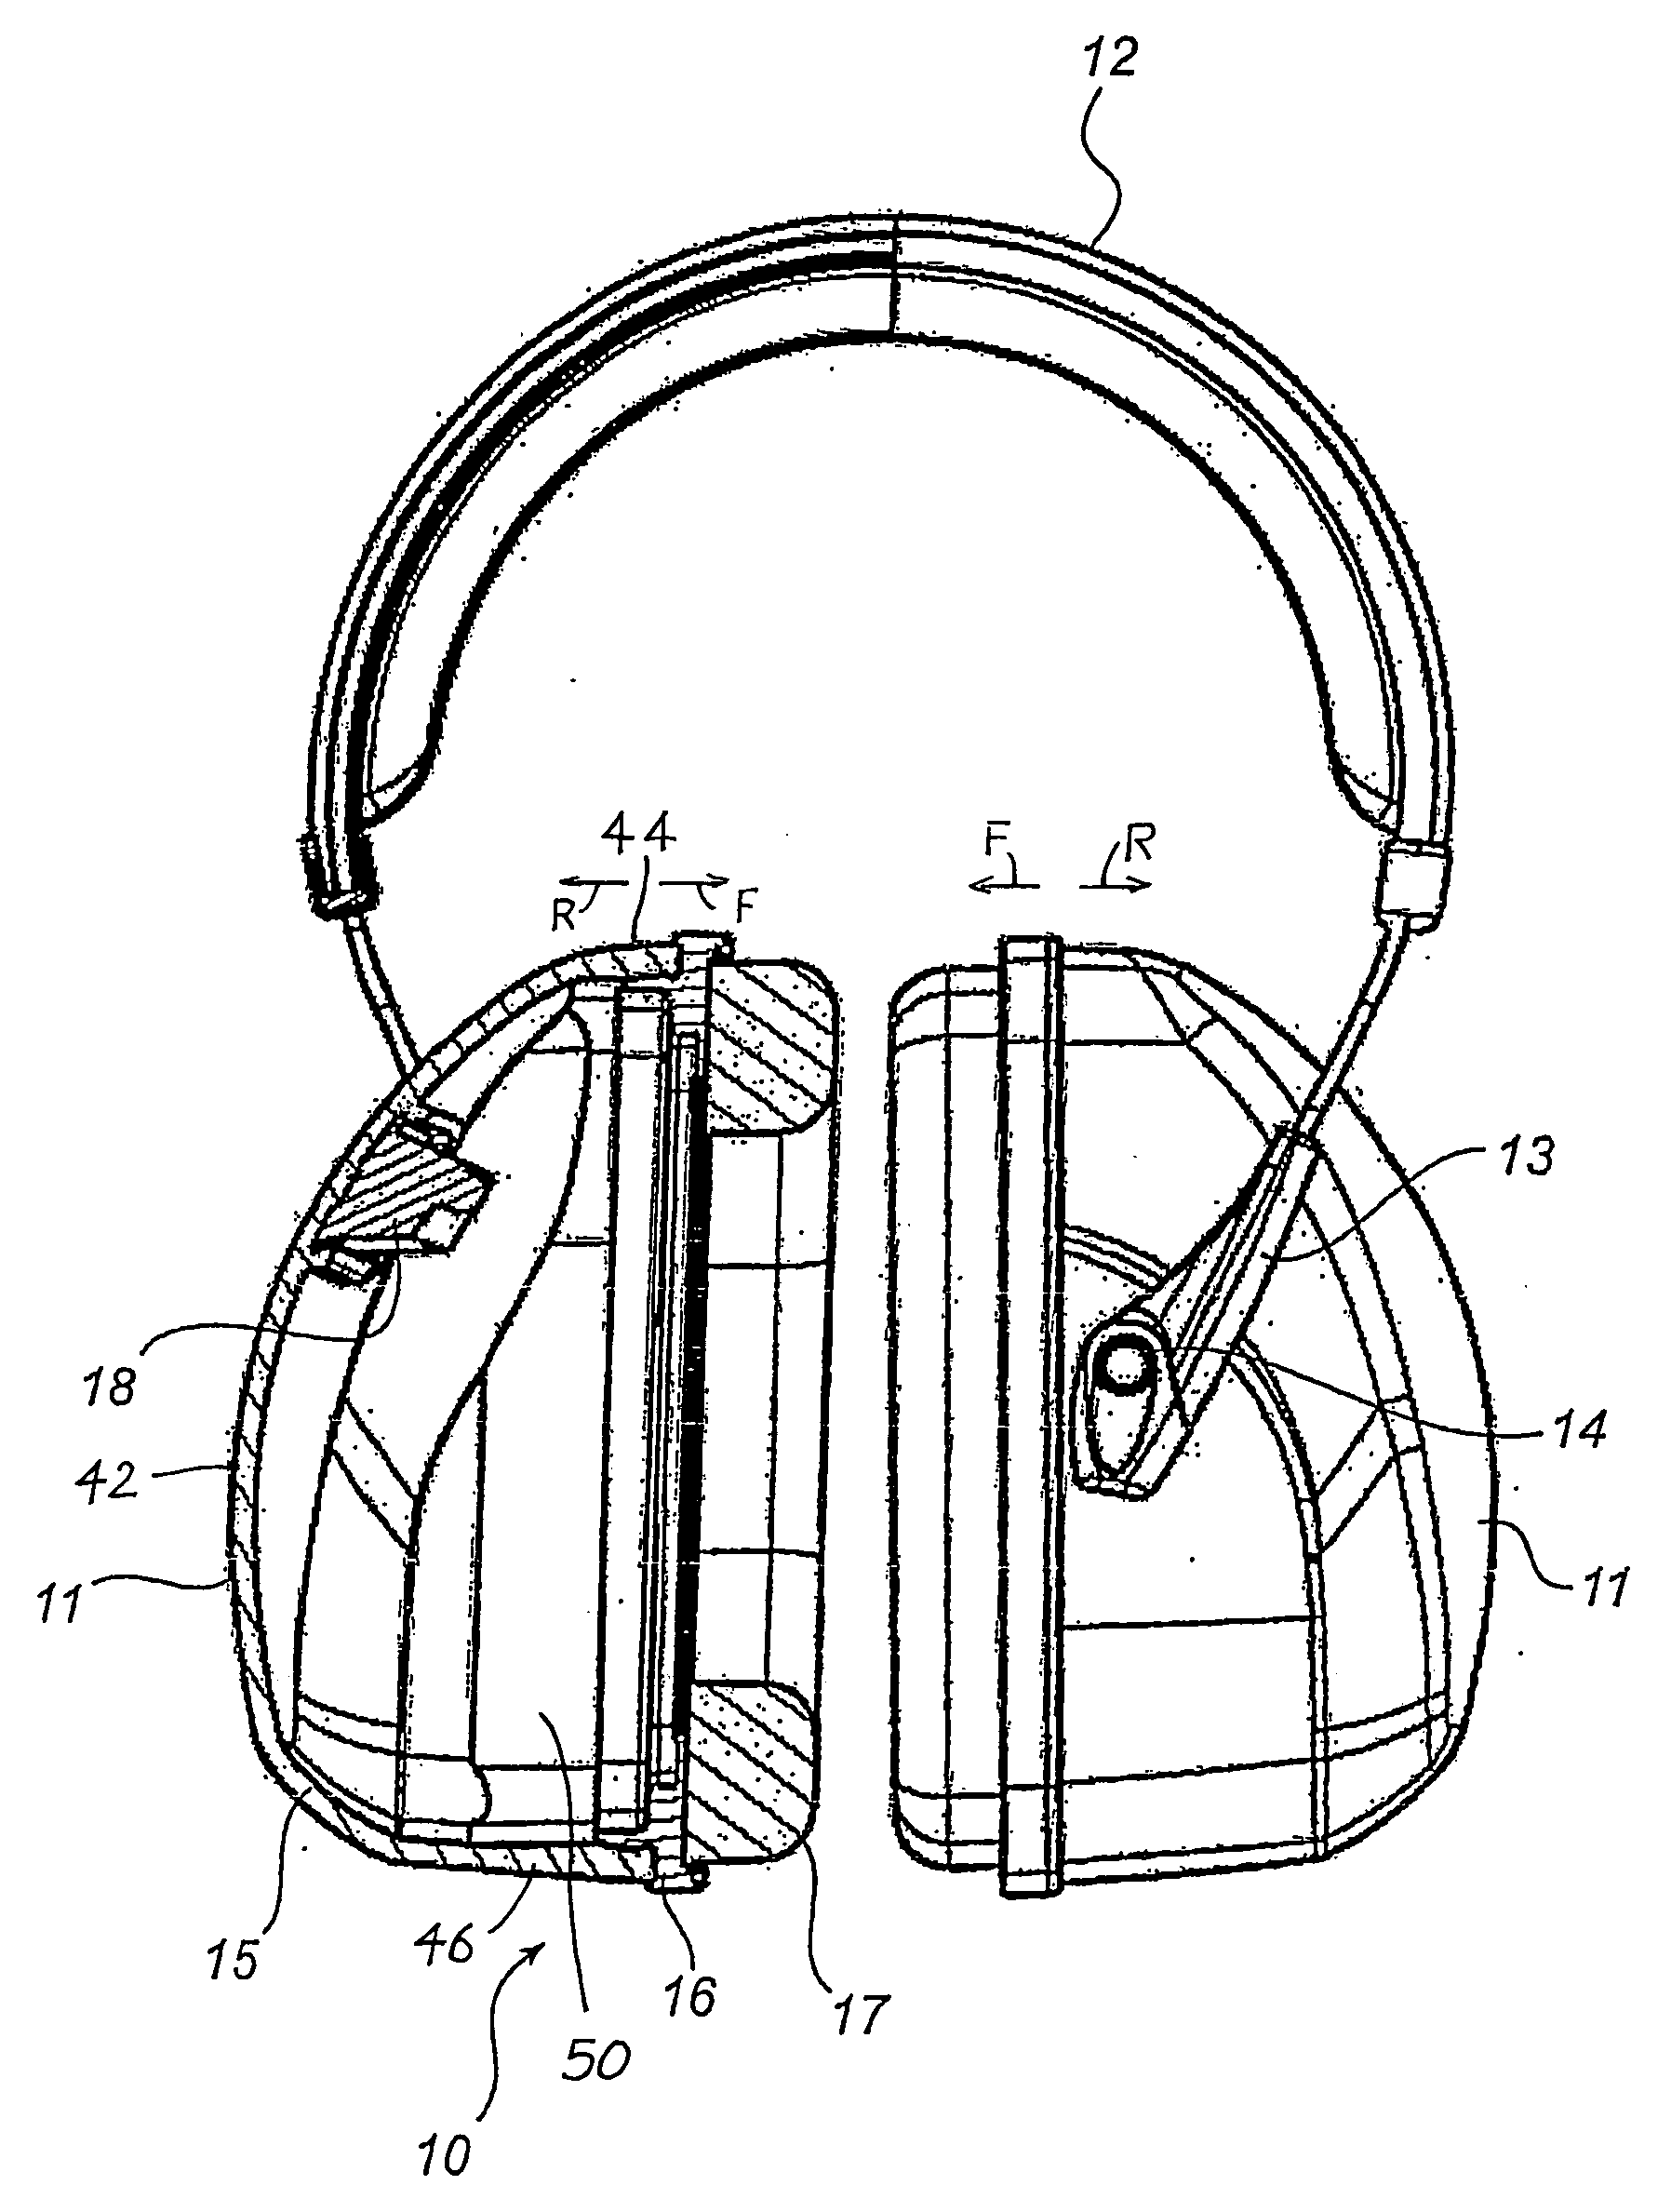 Cap for use as hearing protection